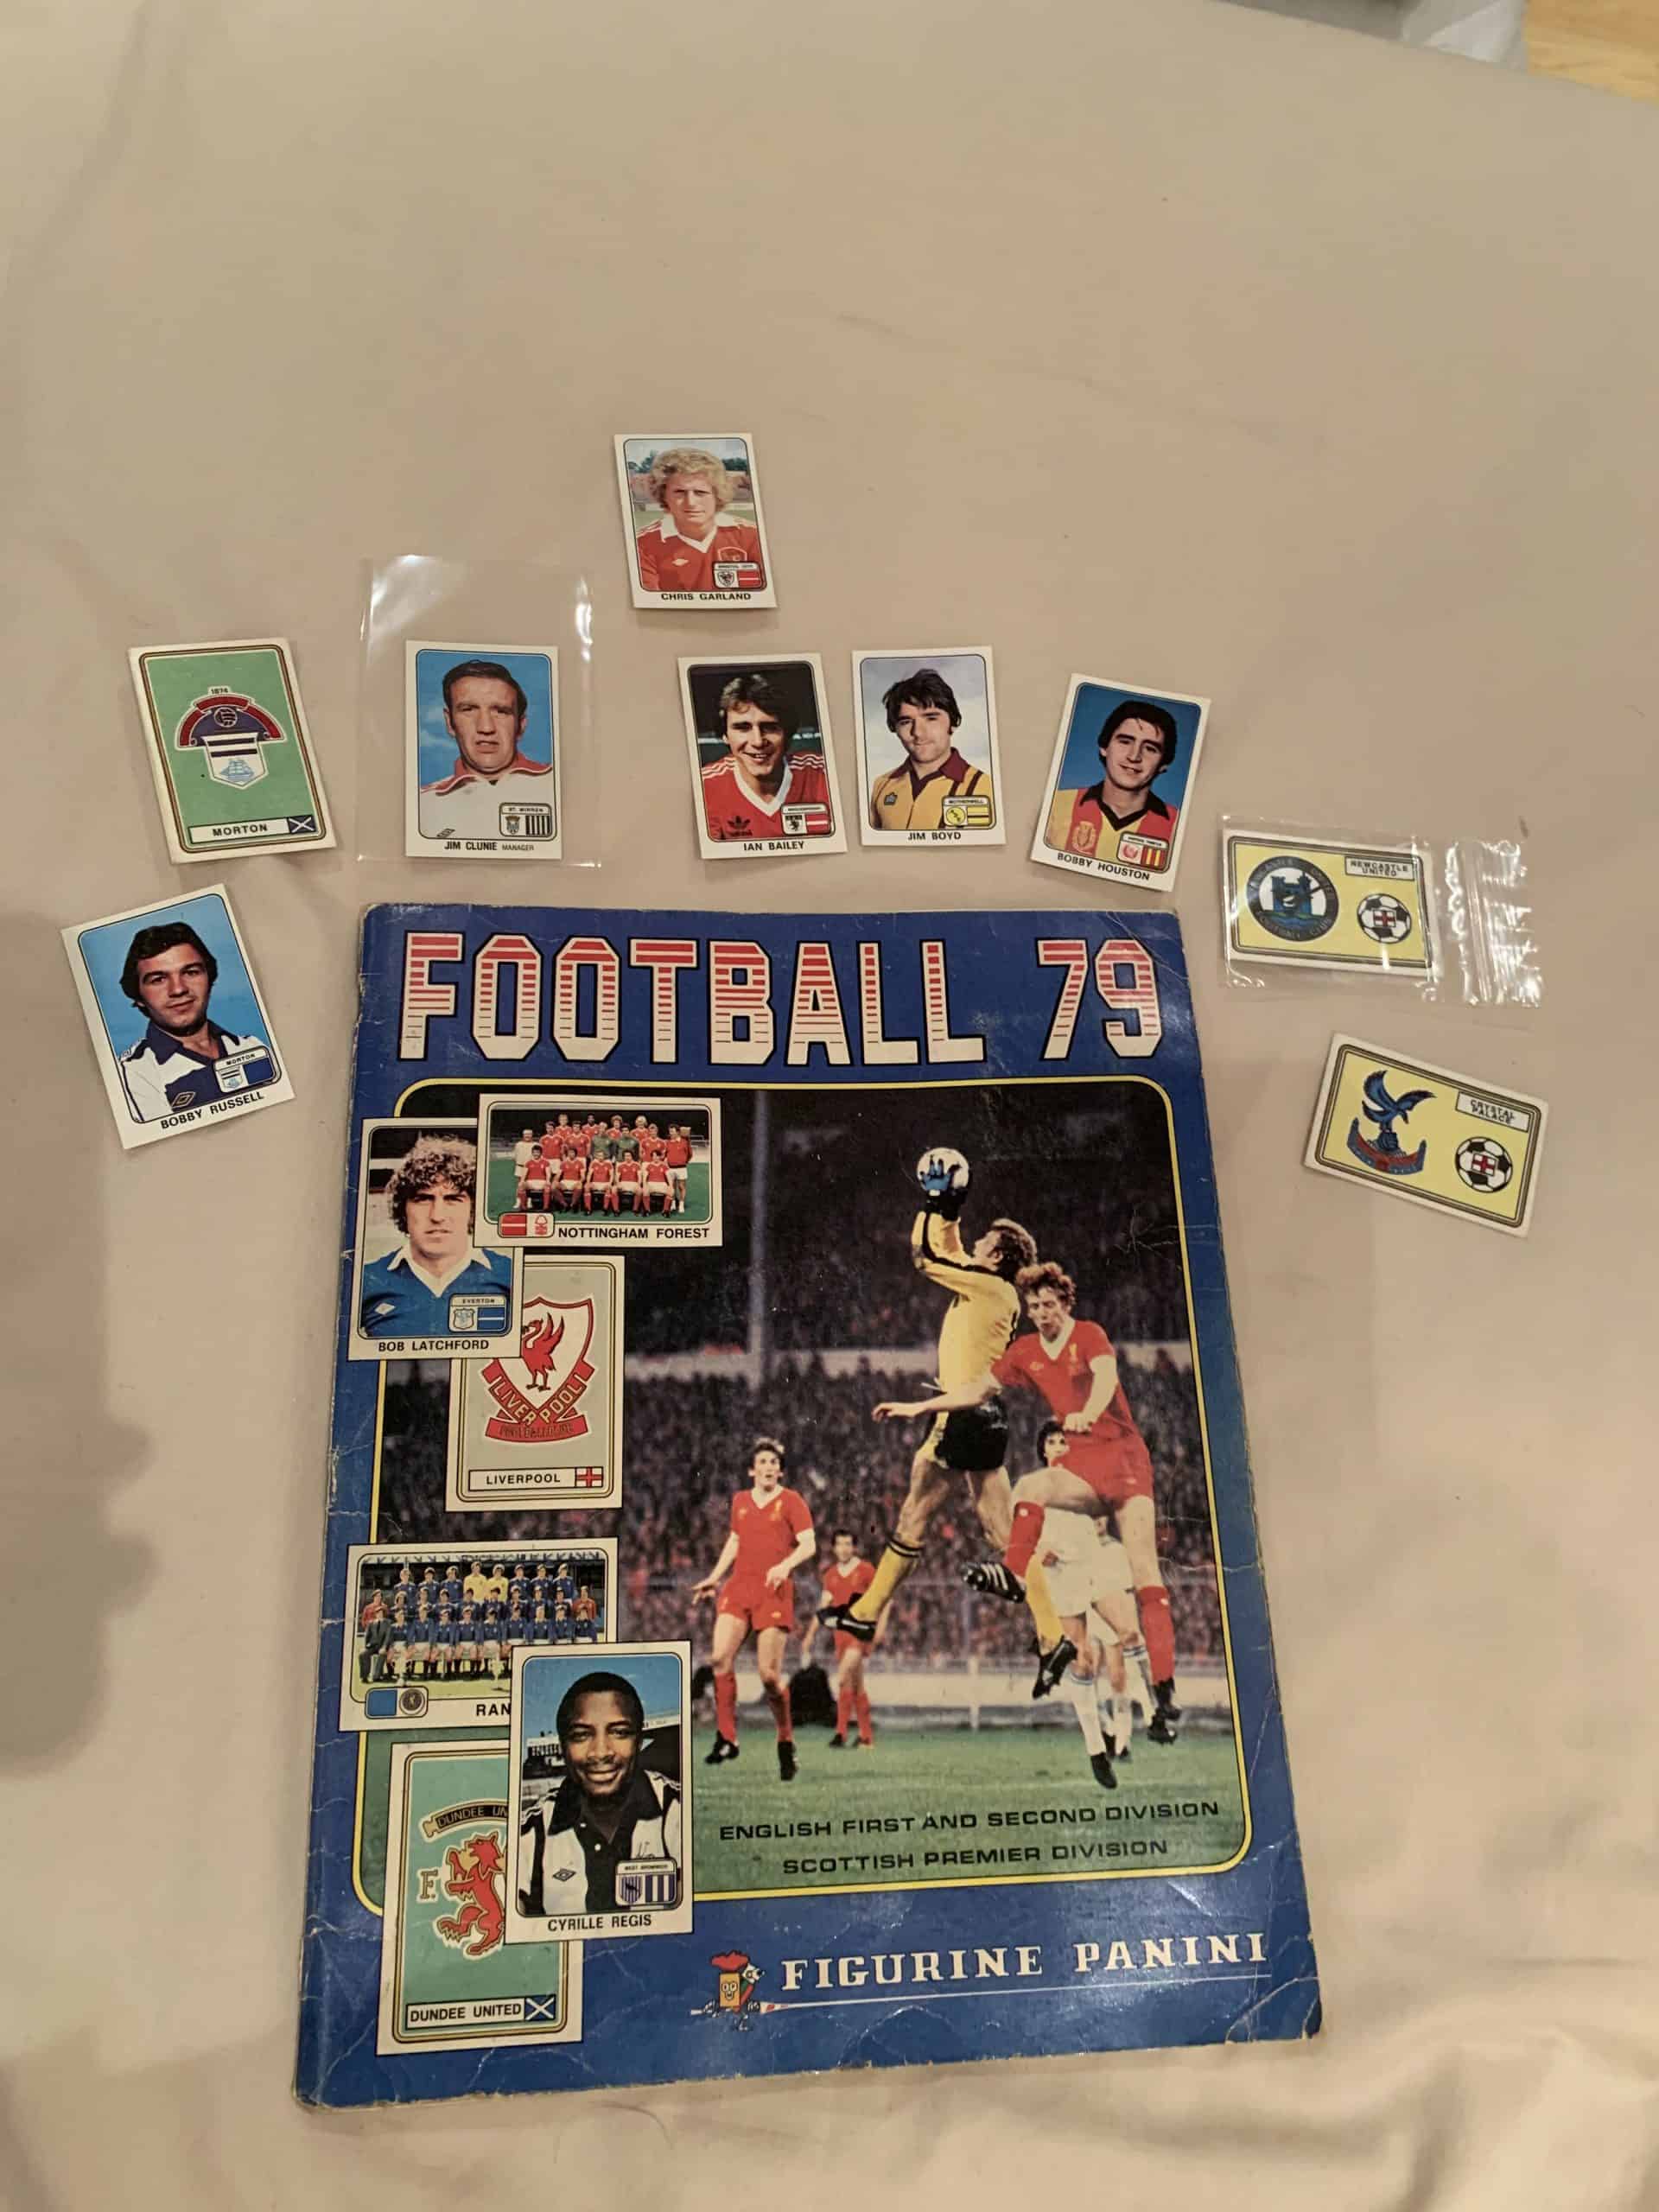 Spurs fan finally fills sticker book more than 40 years later